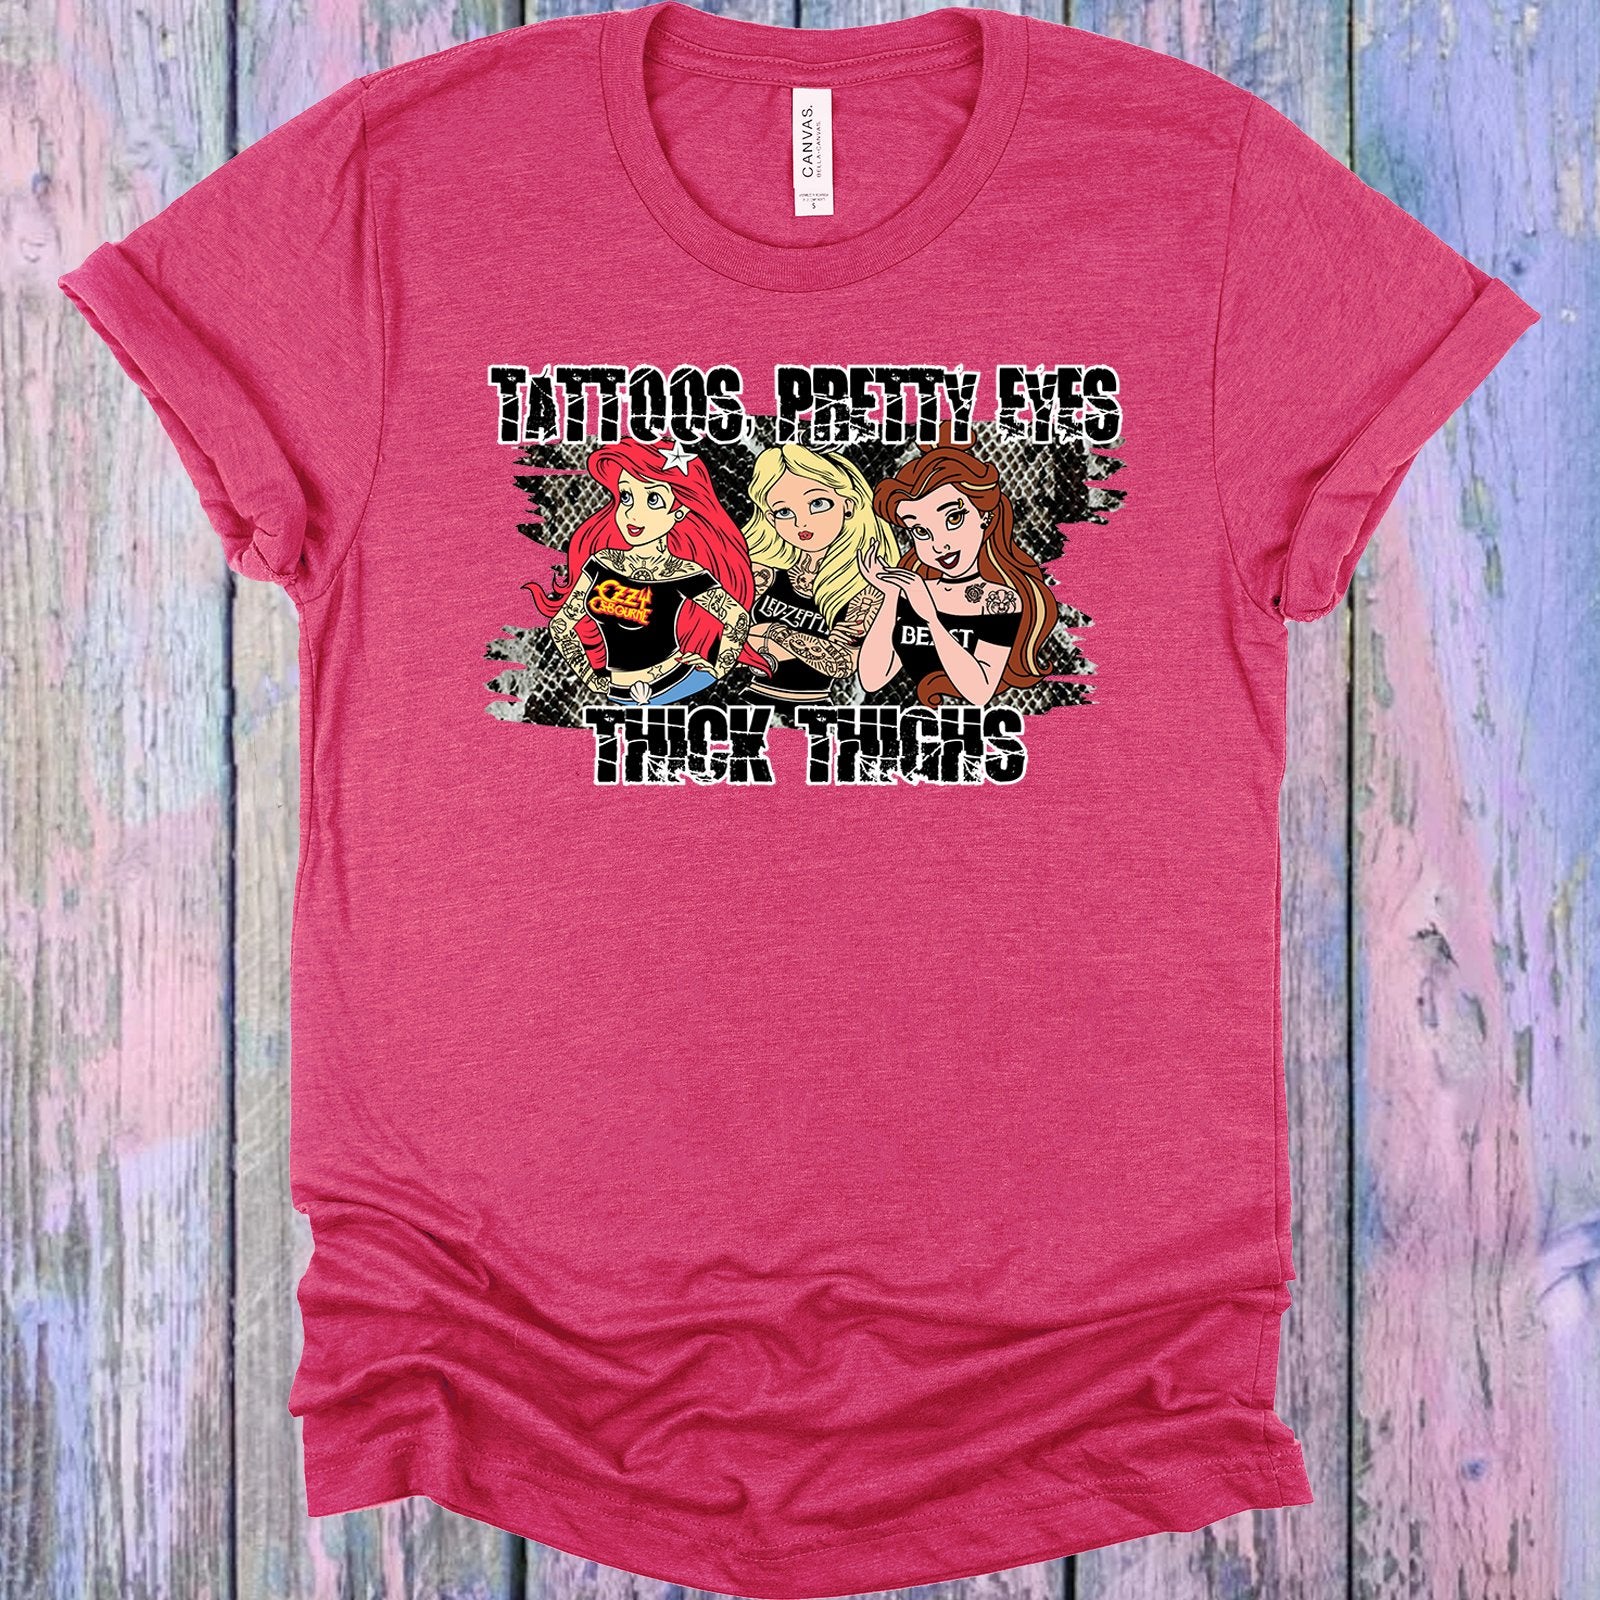 Tattoos Pretty Eyes Thick Thighs Graphic Tee Graphic Tee